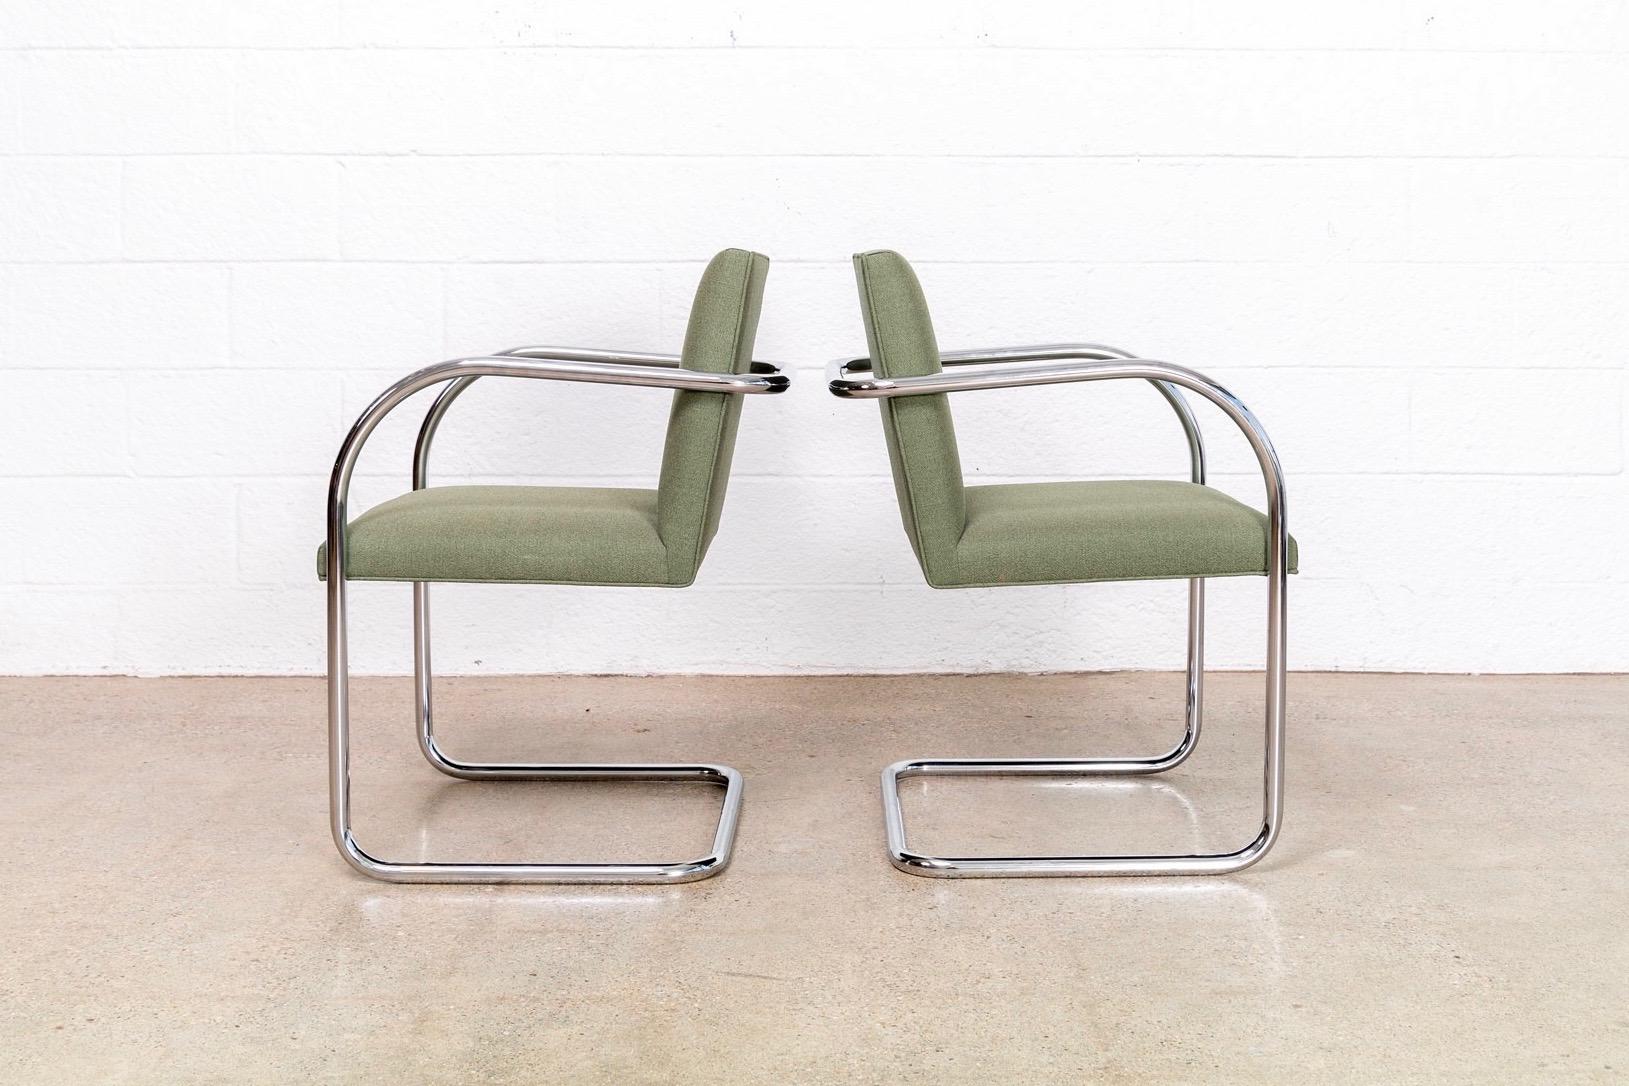 Late 20th Century Mies van der Rohe Green Brno Chrome Cantilever Dining Chairs, Set of 4 For Sale